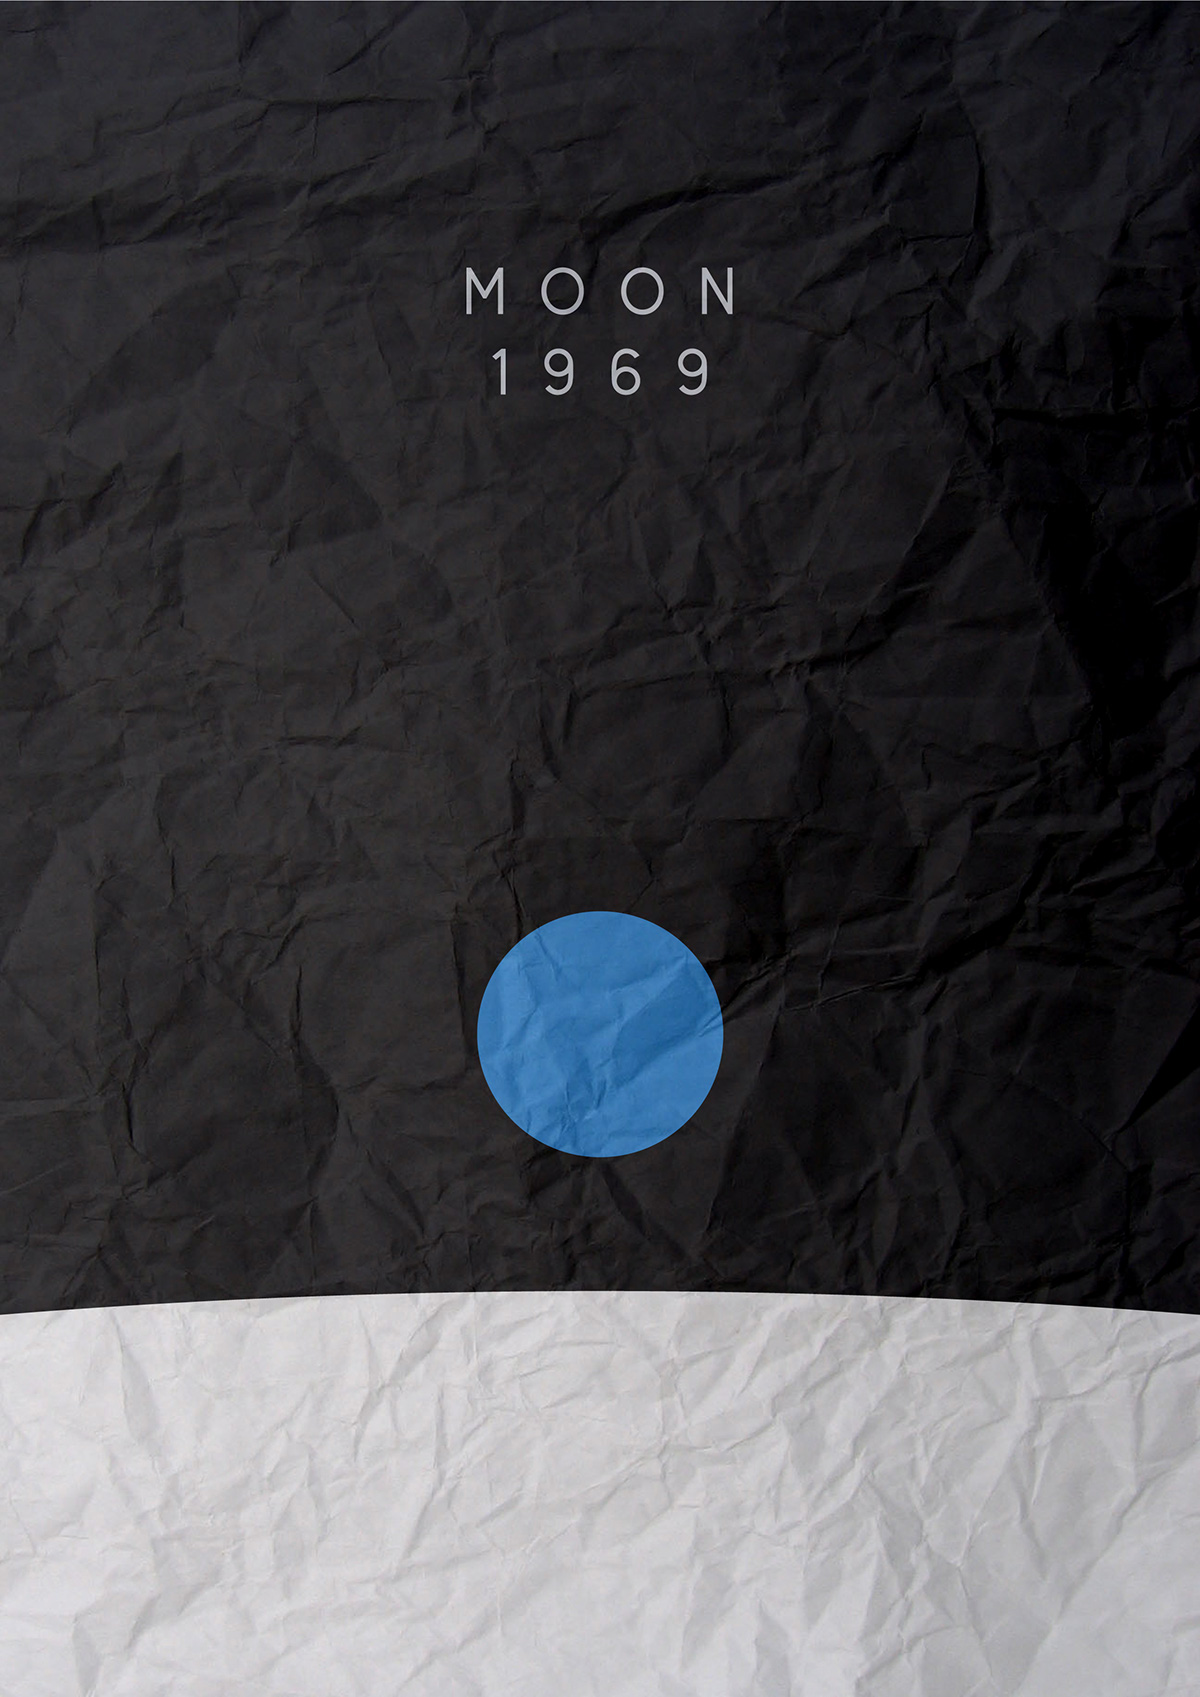 history historic Events Event minimalist minimum minimal poster posters colour texture paper 9-11 911 september 11 11th Day dday D-Day Sputnik berlin wall Fall man on moon armstrong 1969 1989 1944 1957 Space  race america germany Russia france new york